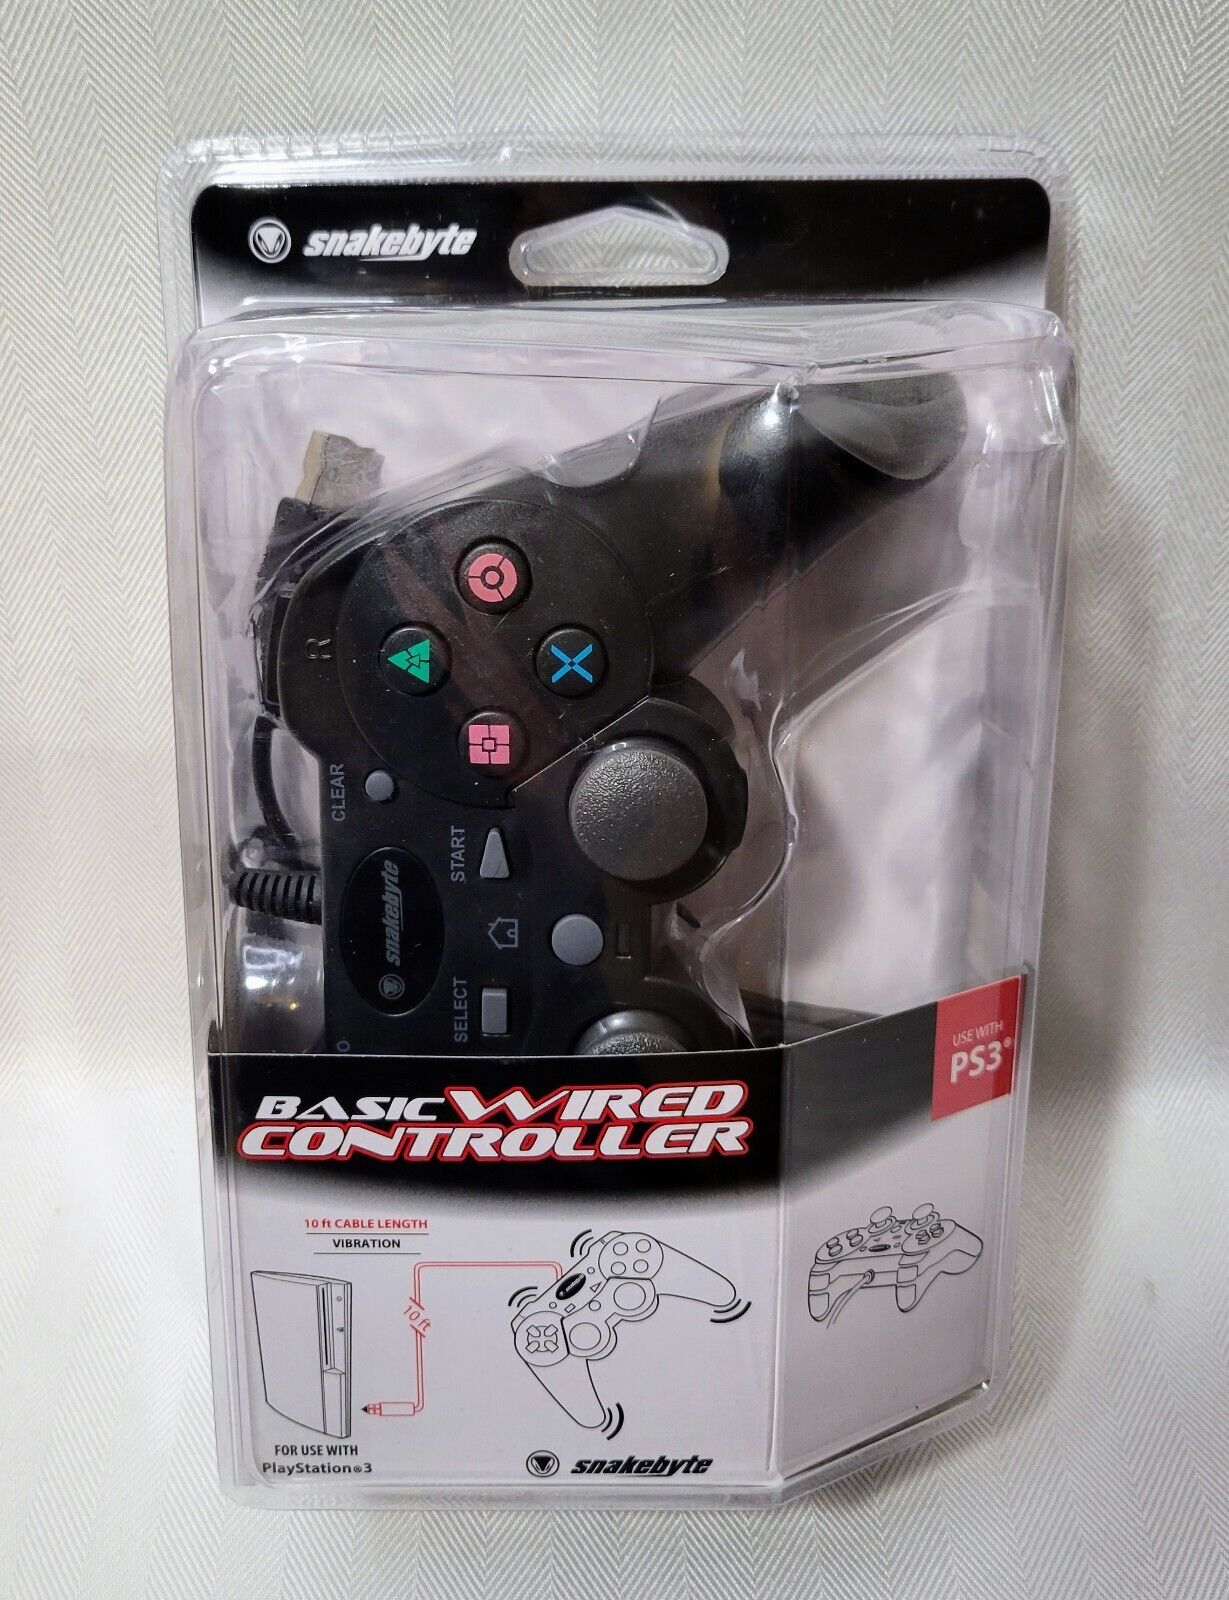 Snakebyte Basic Wired Controller PlayStation PS3 10 ft cable New Sealed Snakebyte SB00566